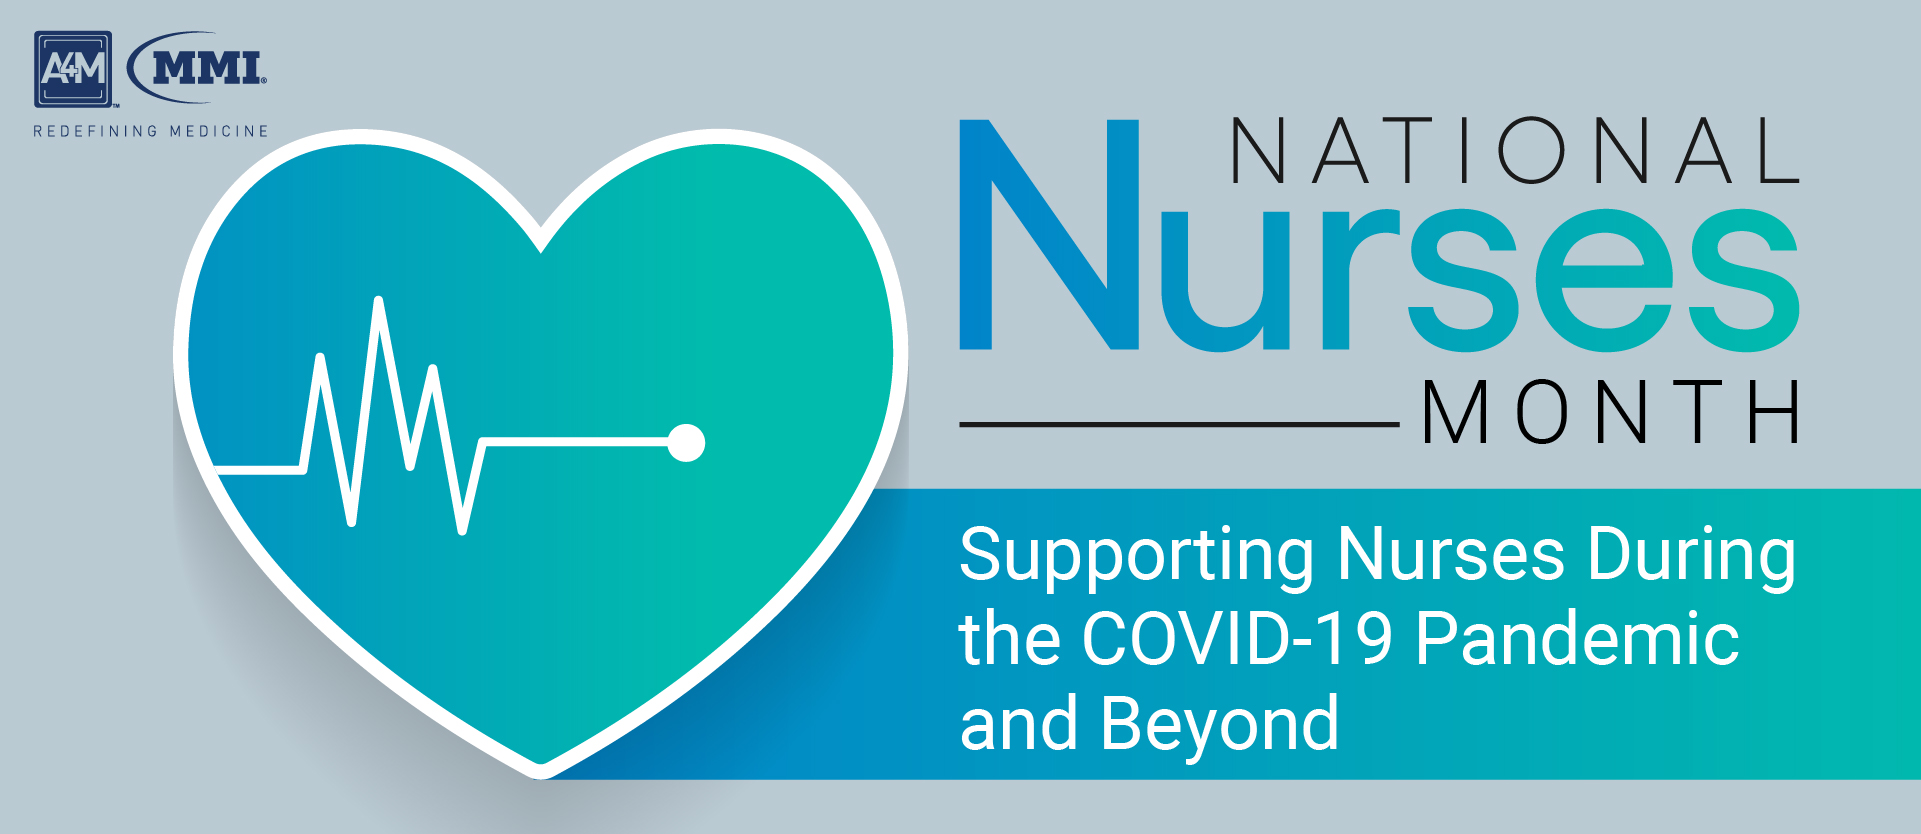 National Nurses Month Supporting Nurses During the COVID19 Pandemic